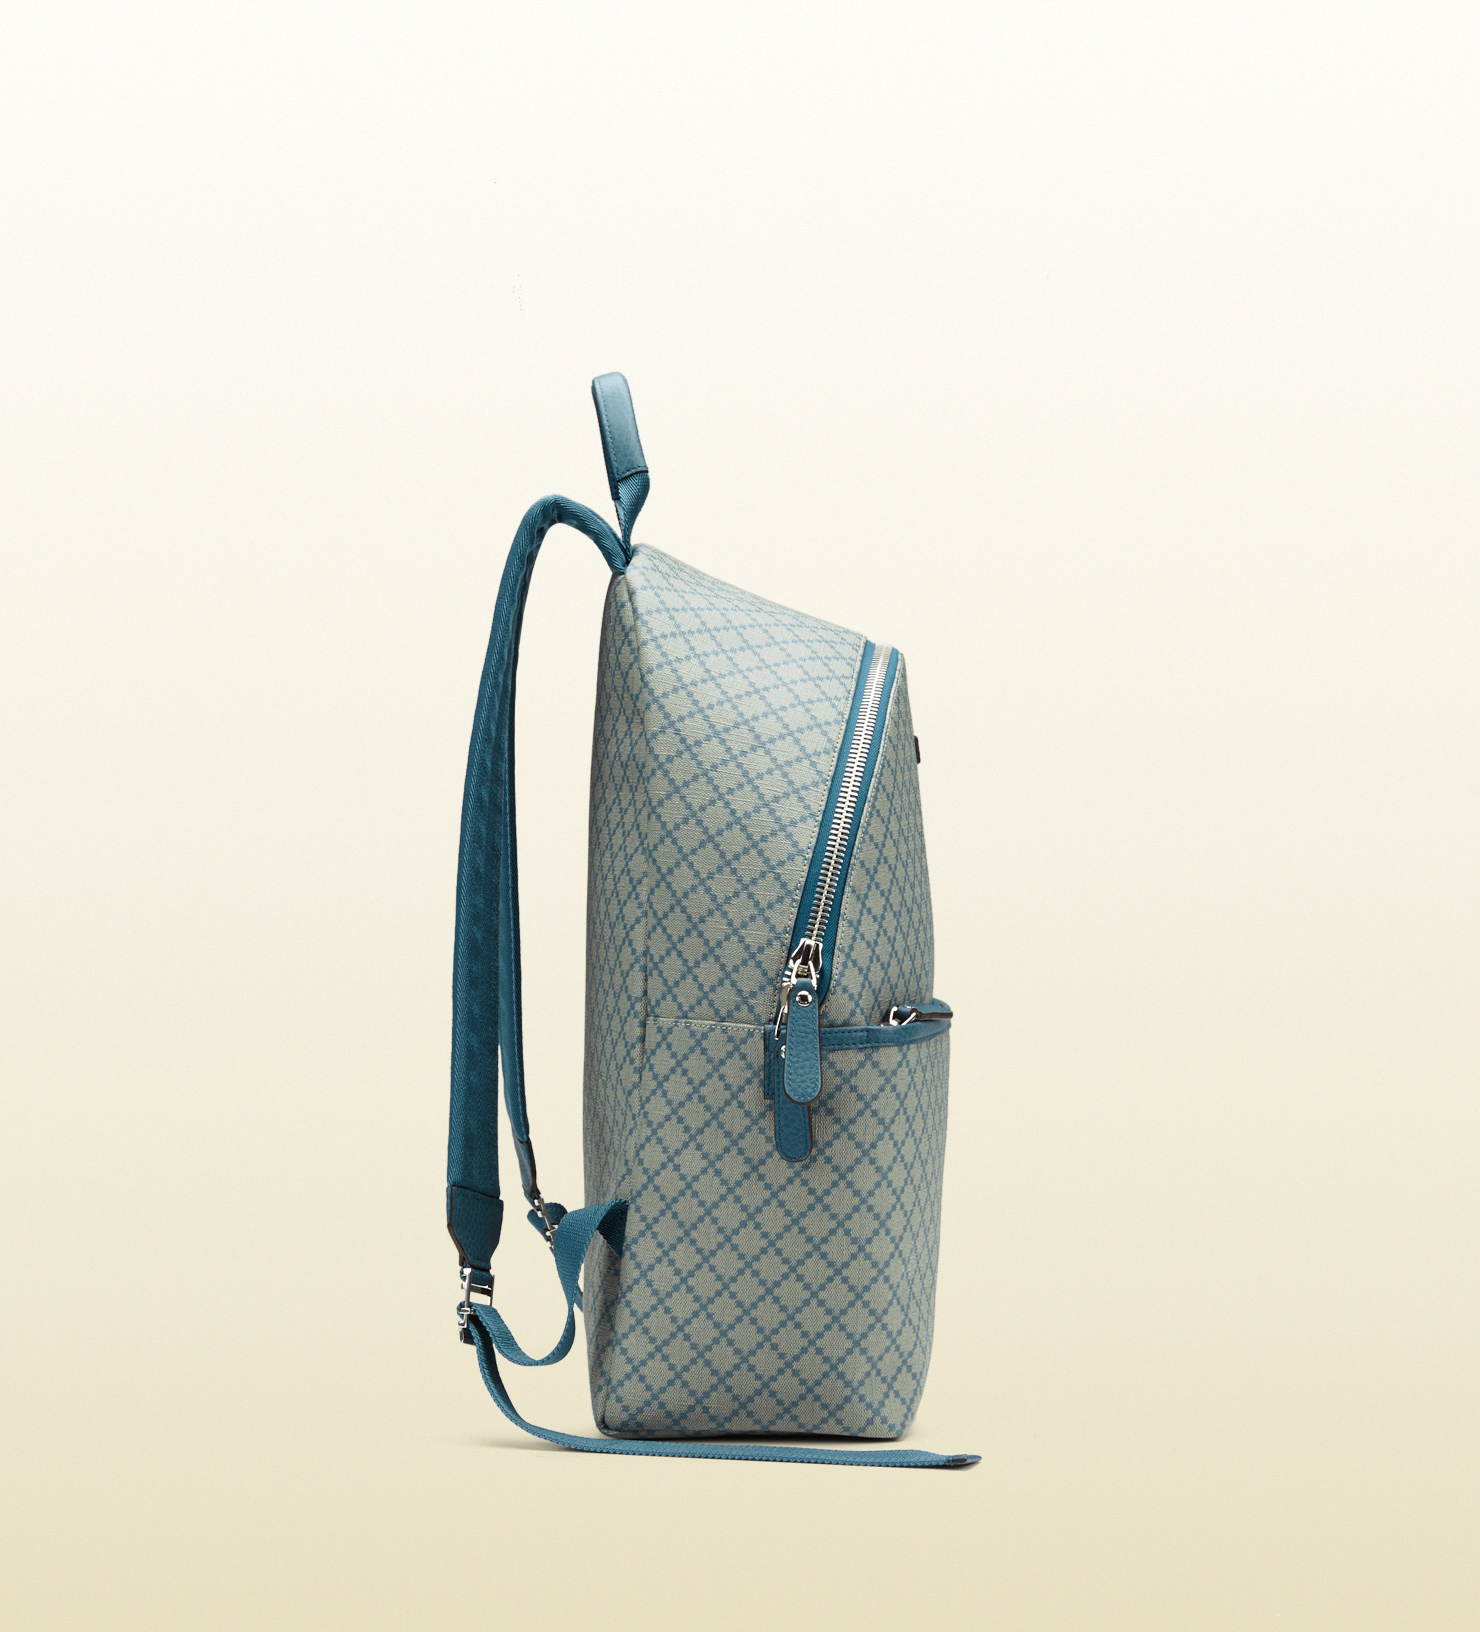 Gucci Diamante Supreme Canvas Backpack in Beige (Blue) for Men - Lyst